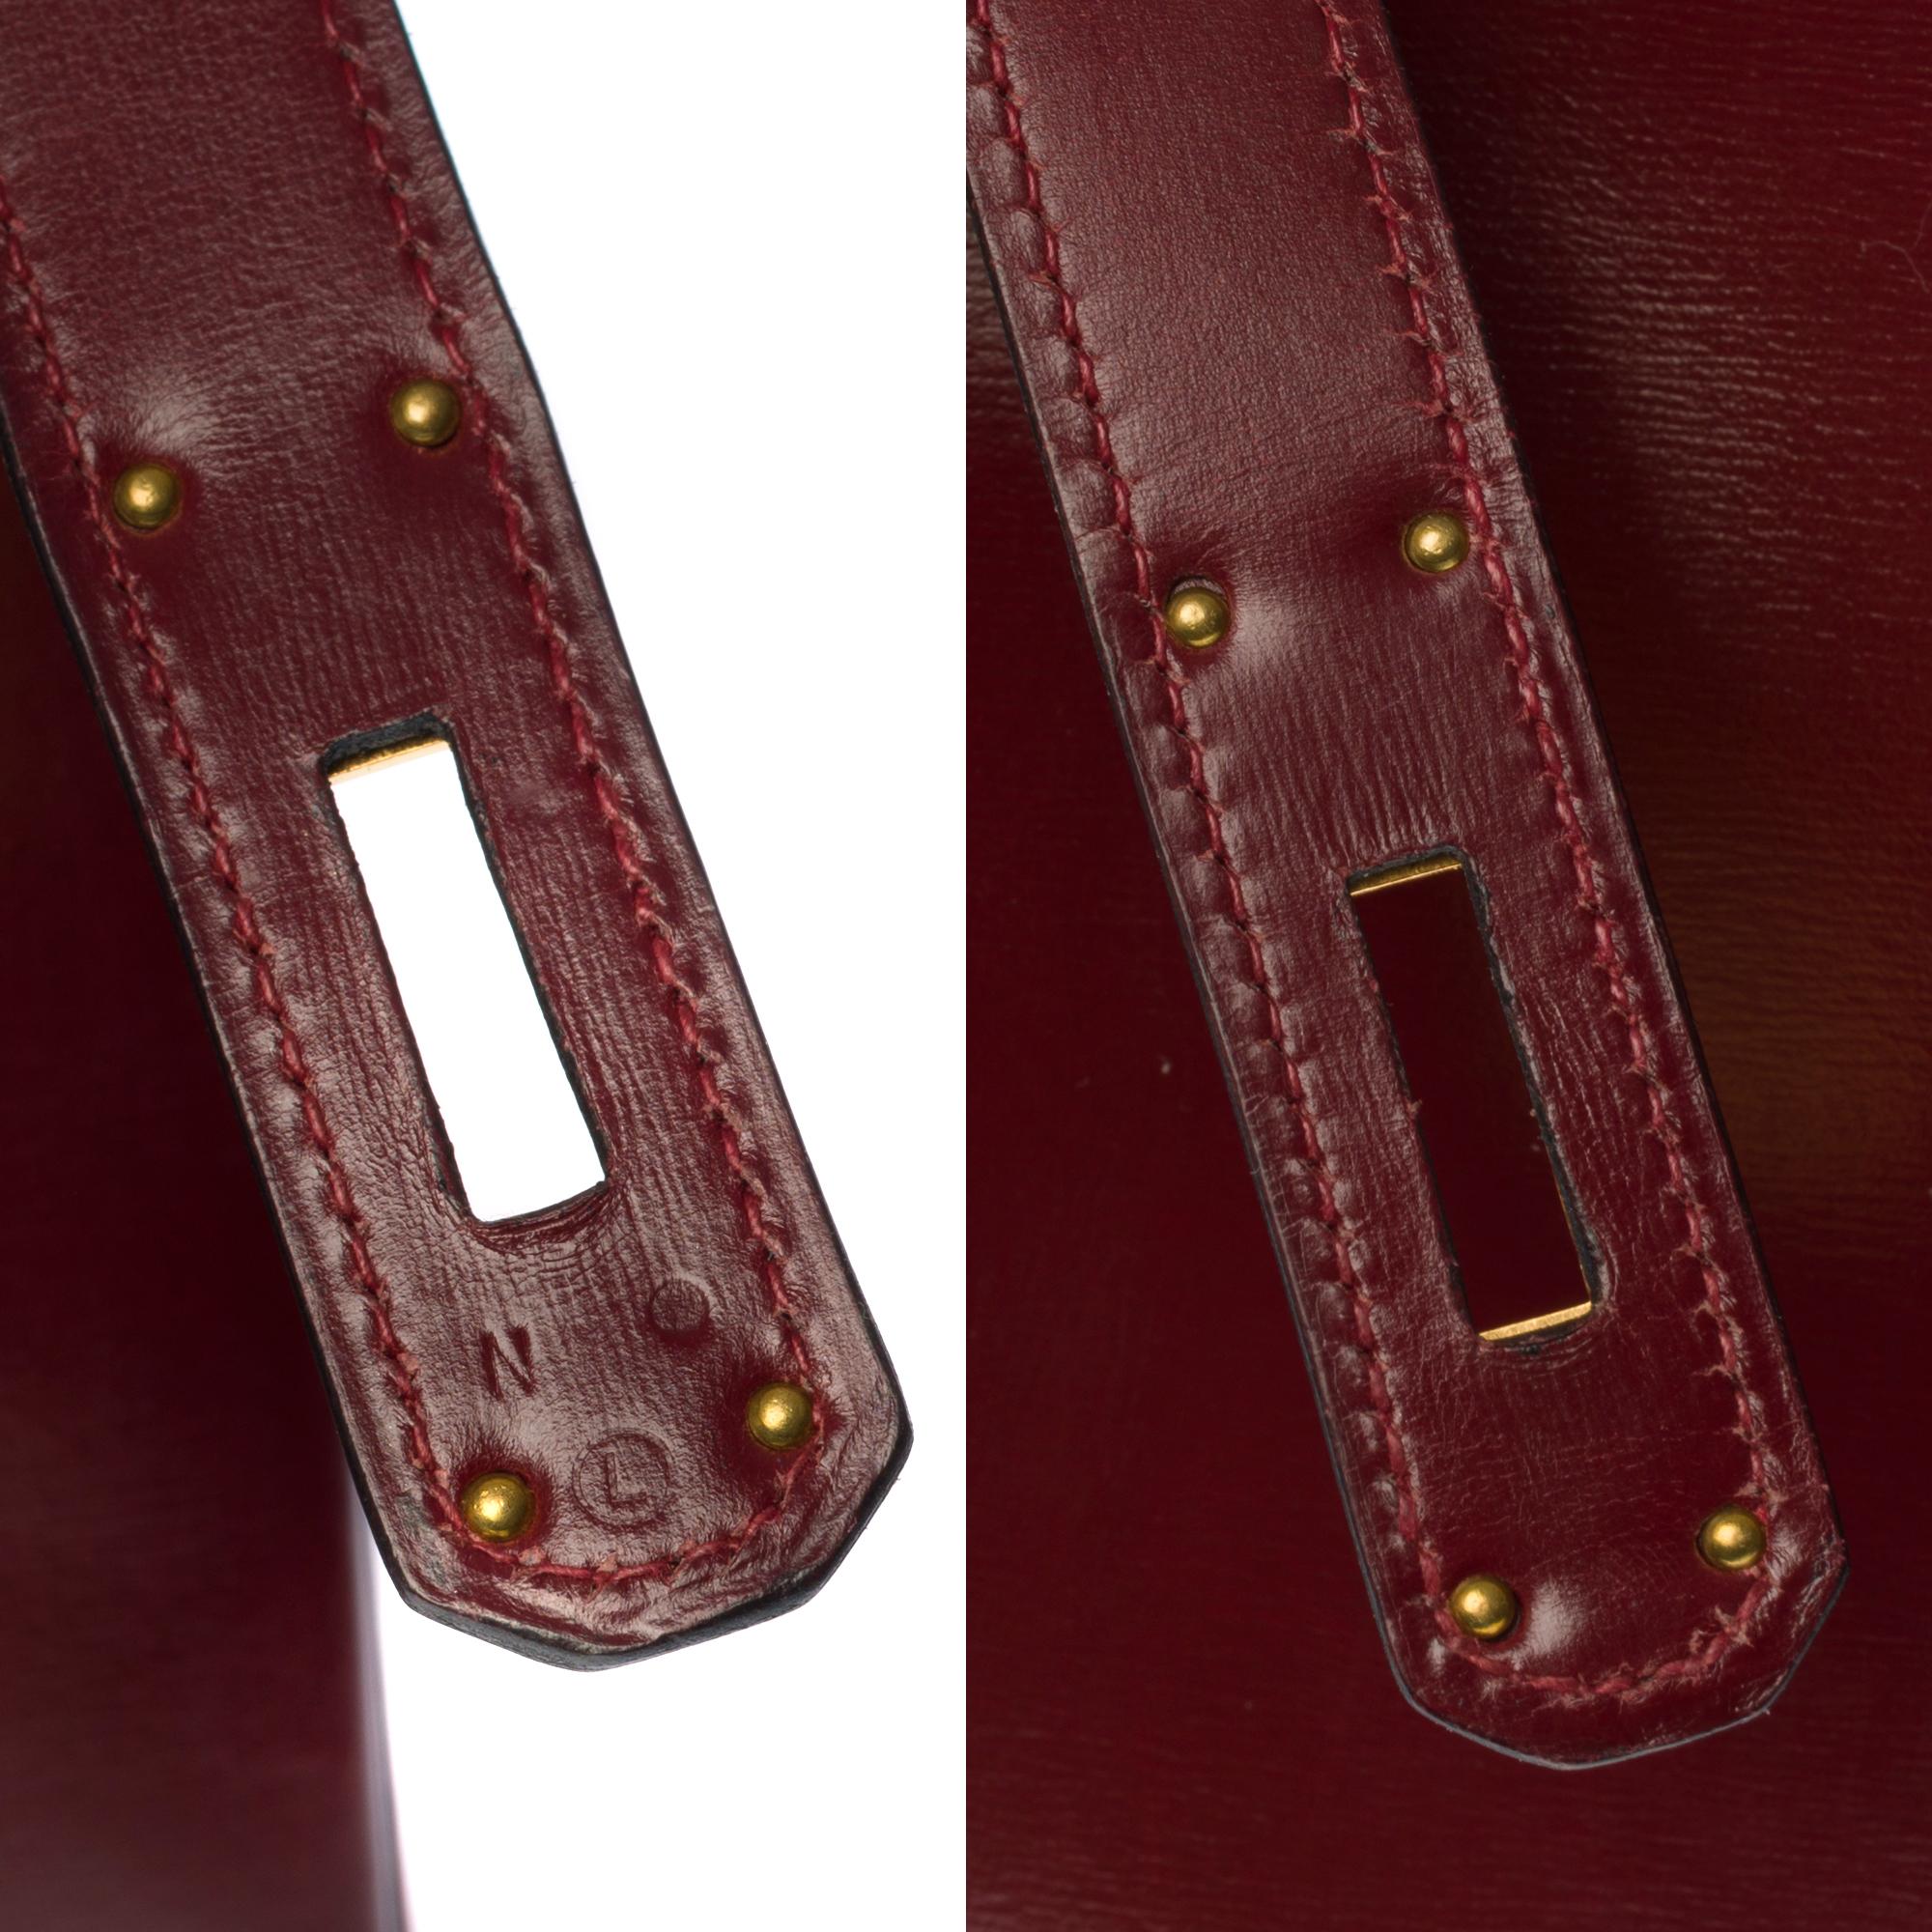 Brown Hermès Kelly 32cm handbag with strap in burgundy calf leather and GHW